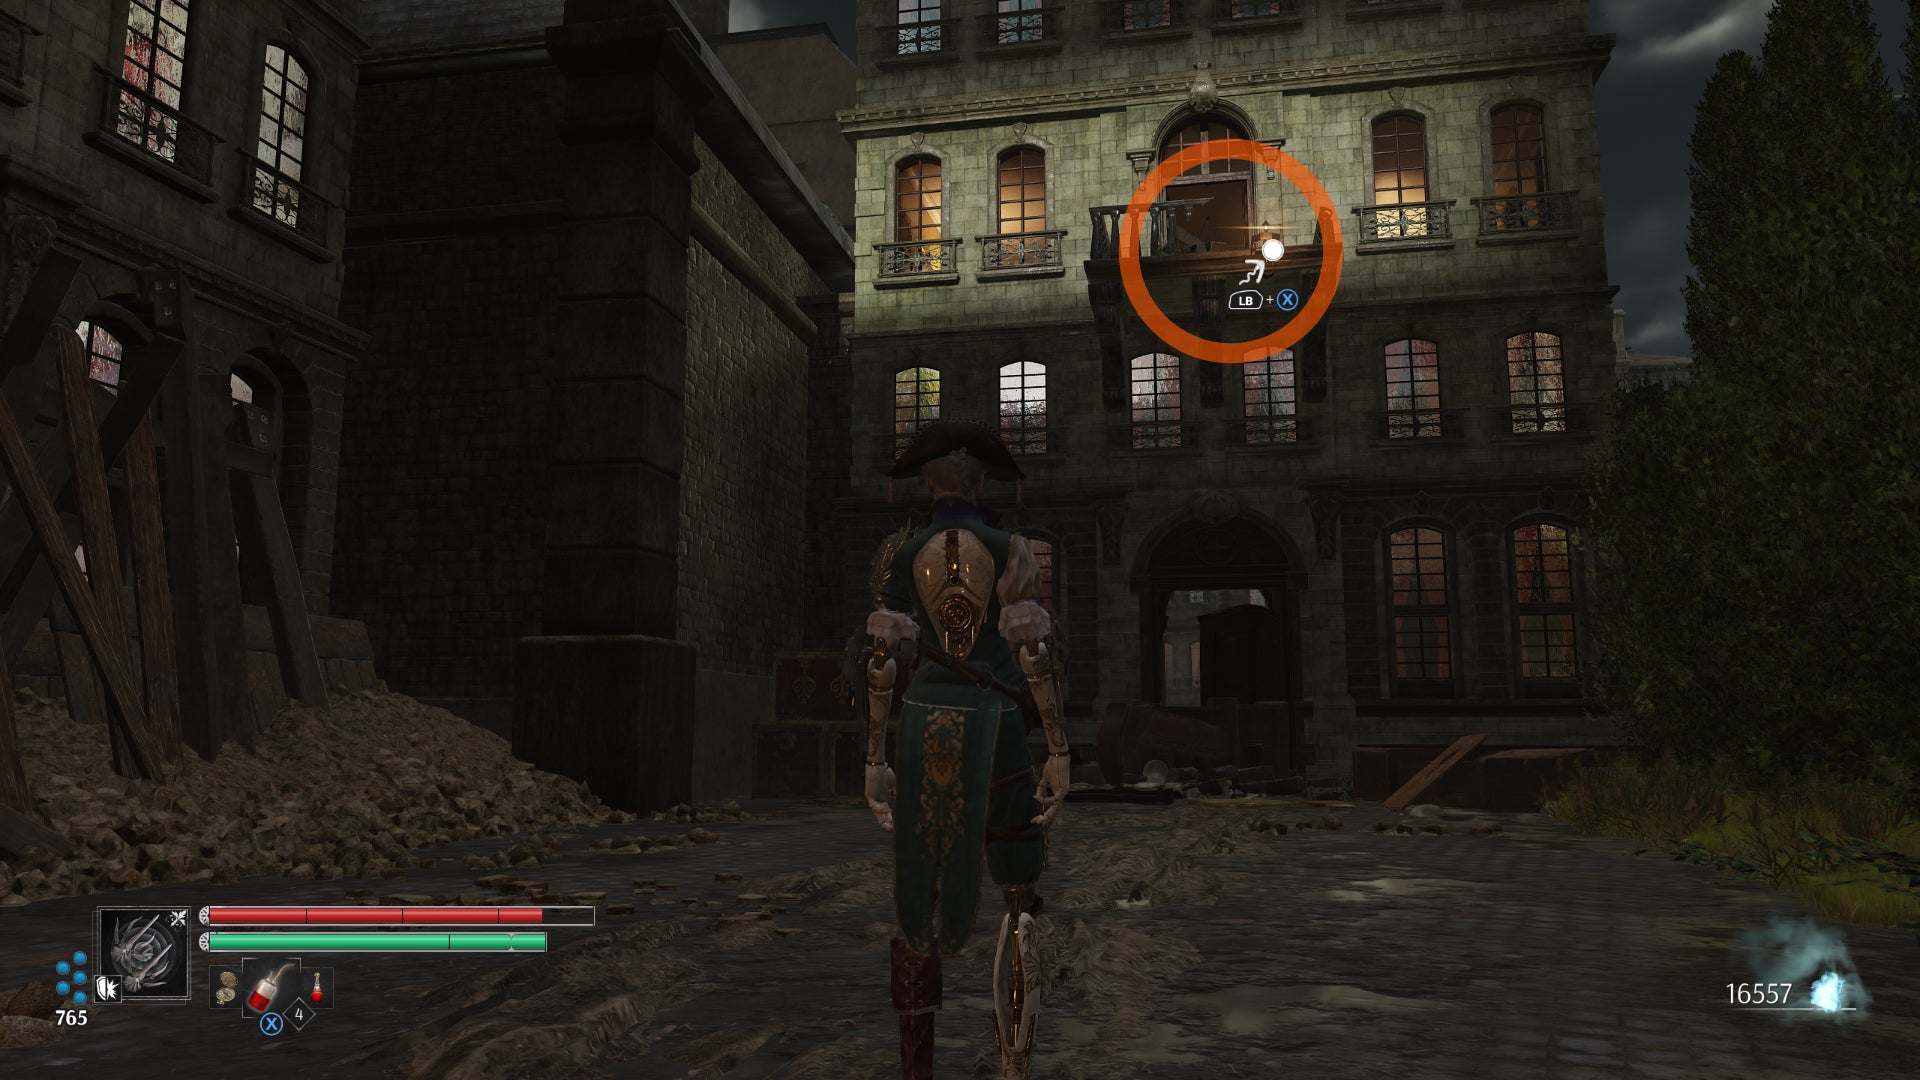 Aegis in Steelrising spots a grapple point on the first floor of the building in front of her.